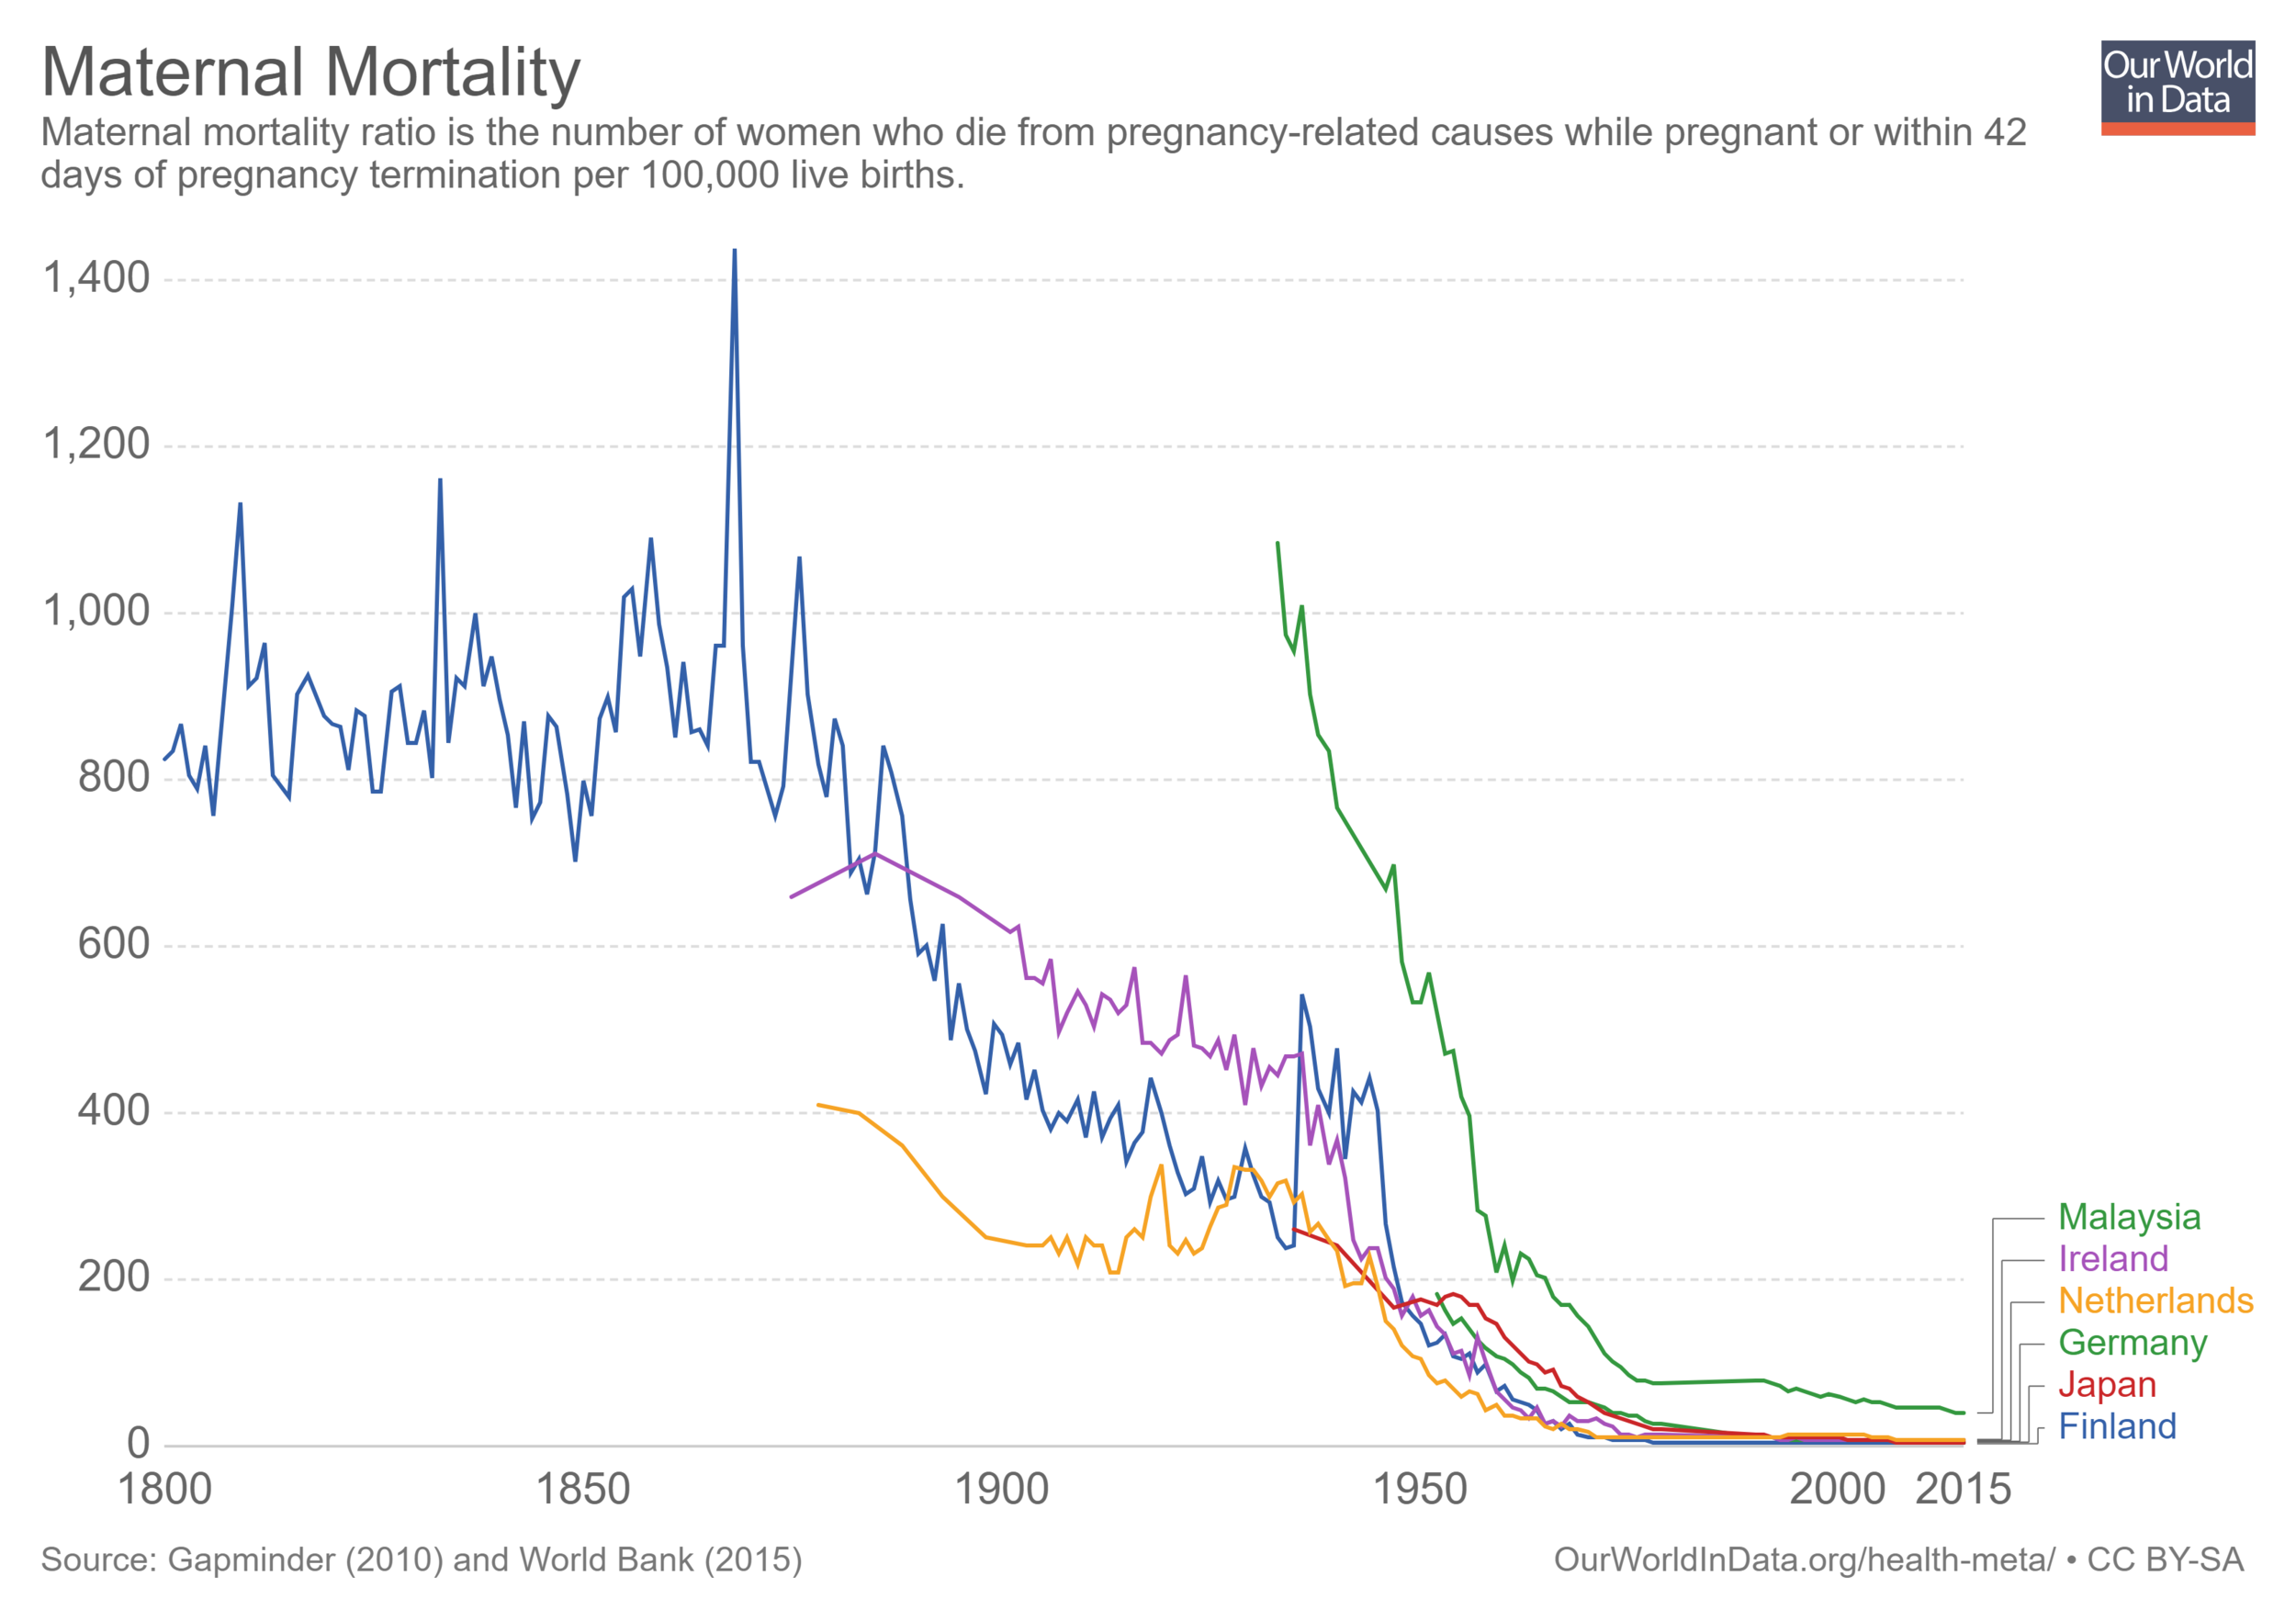 Maternal mortality over time Our World in Data Global Health https://ourworldindata.org/health-meta